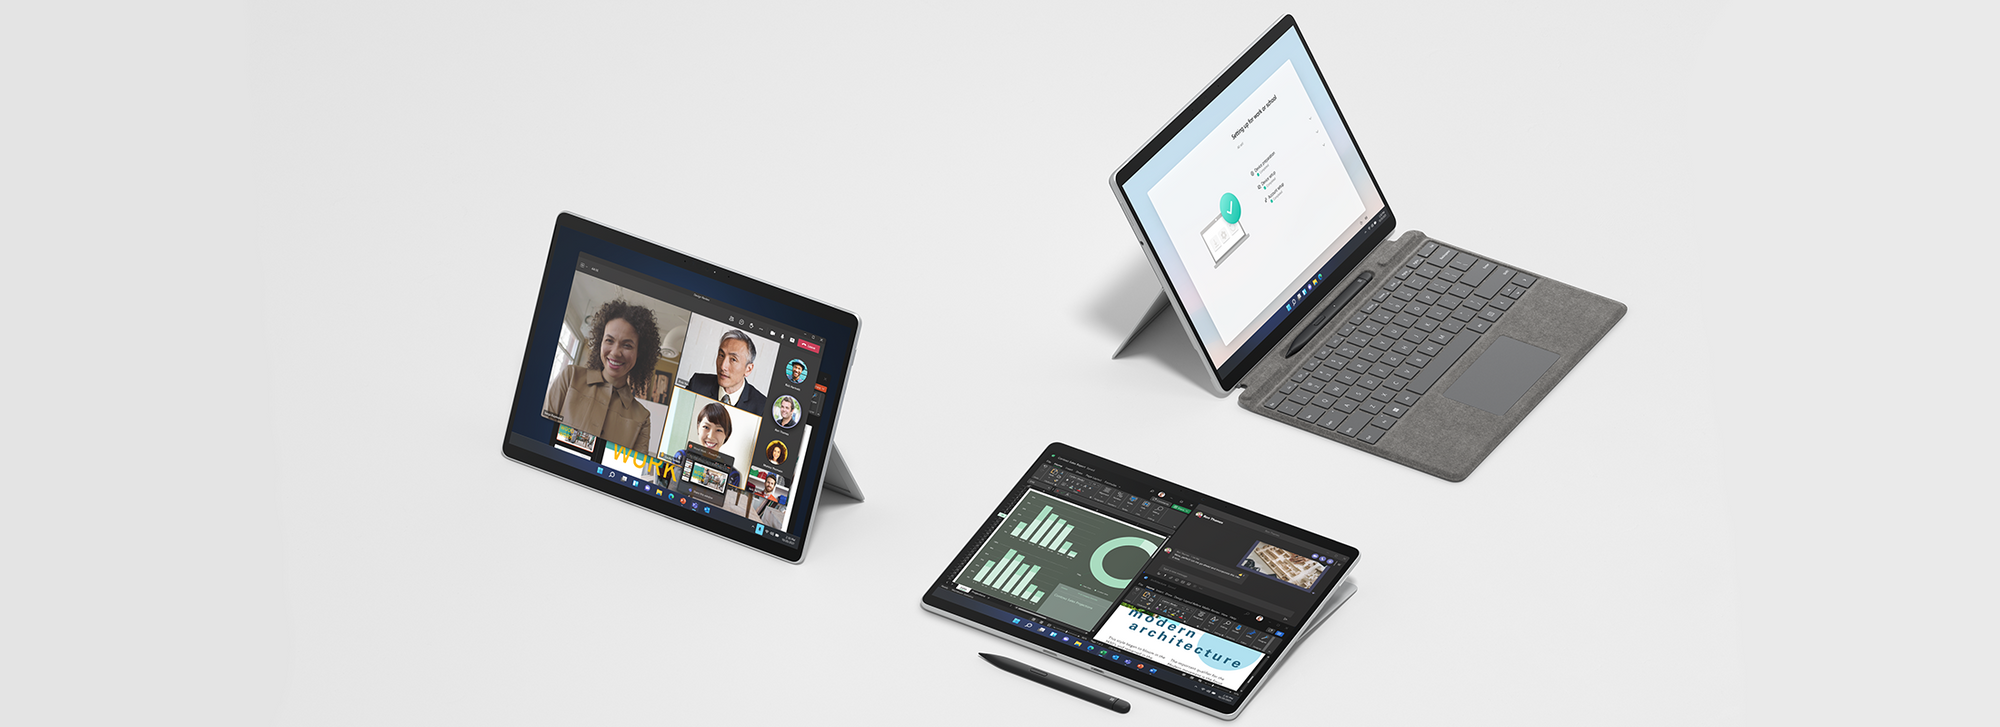 A picture shows the Surface Pro 8 in three different positions